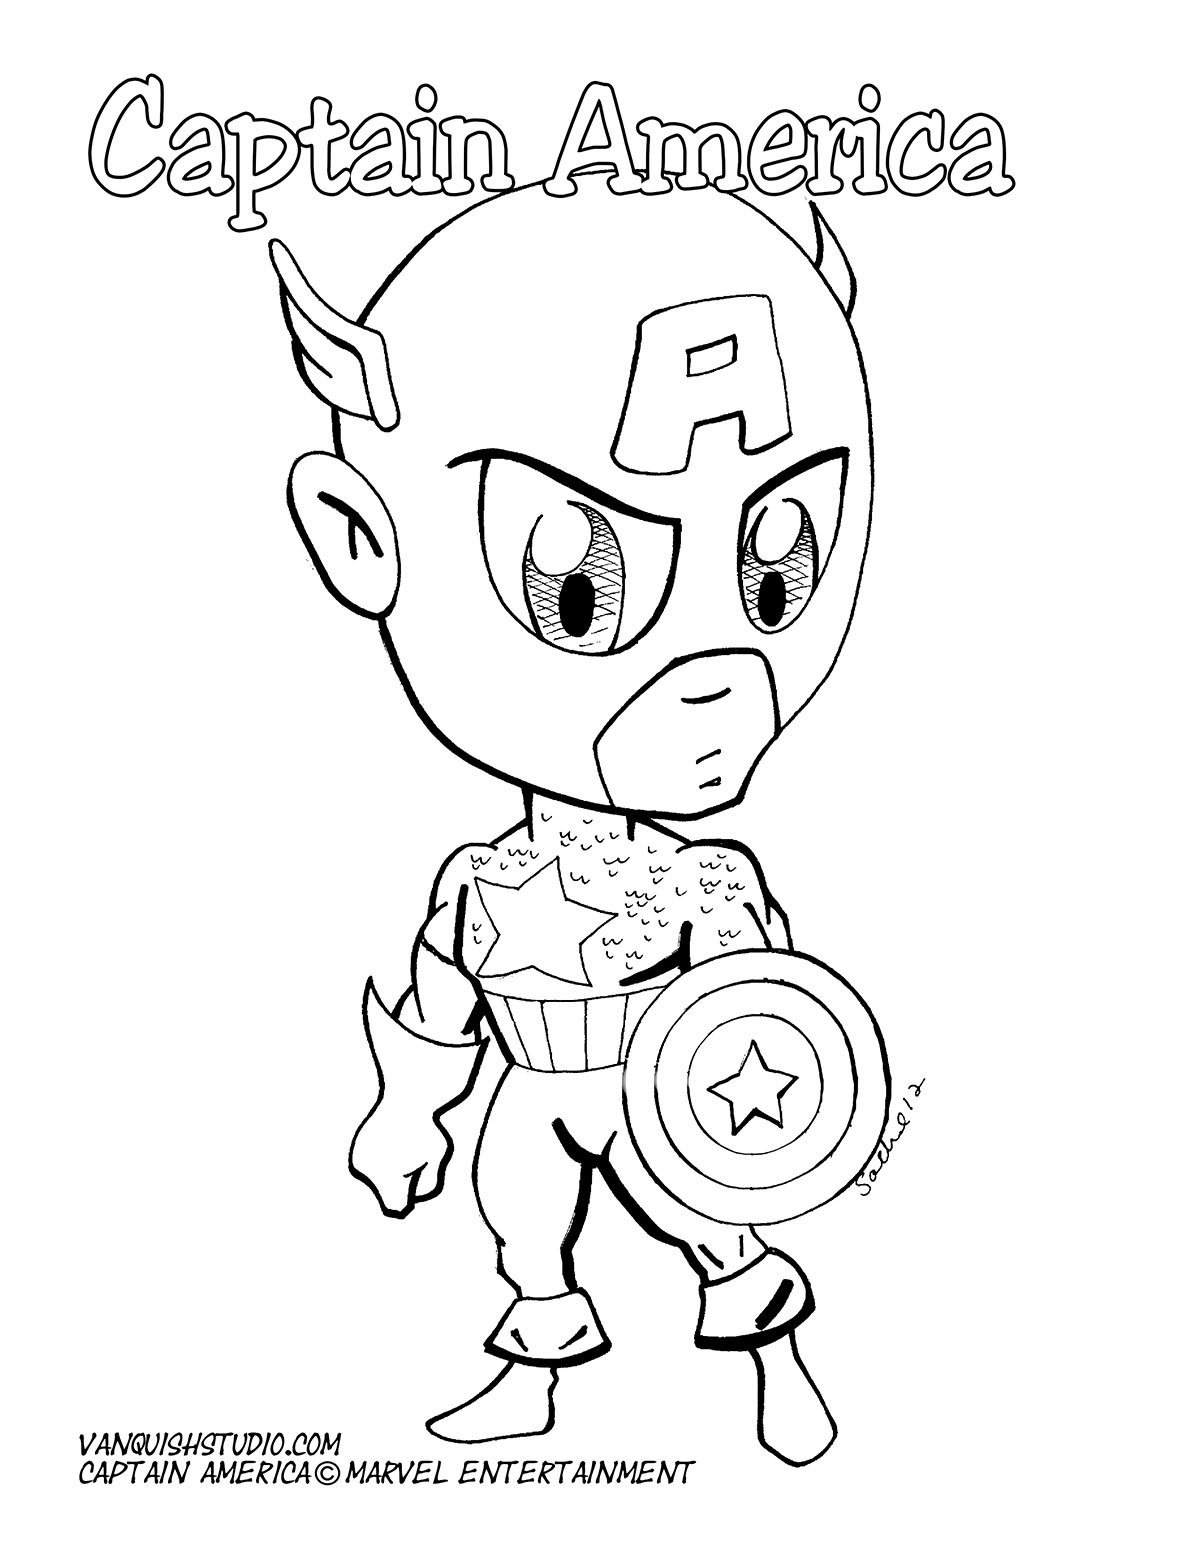 Captain America2 Coloring page